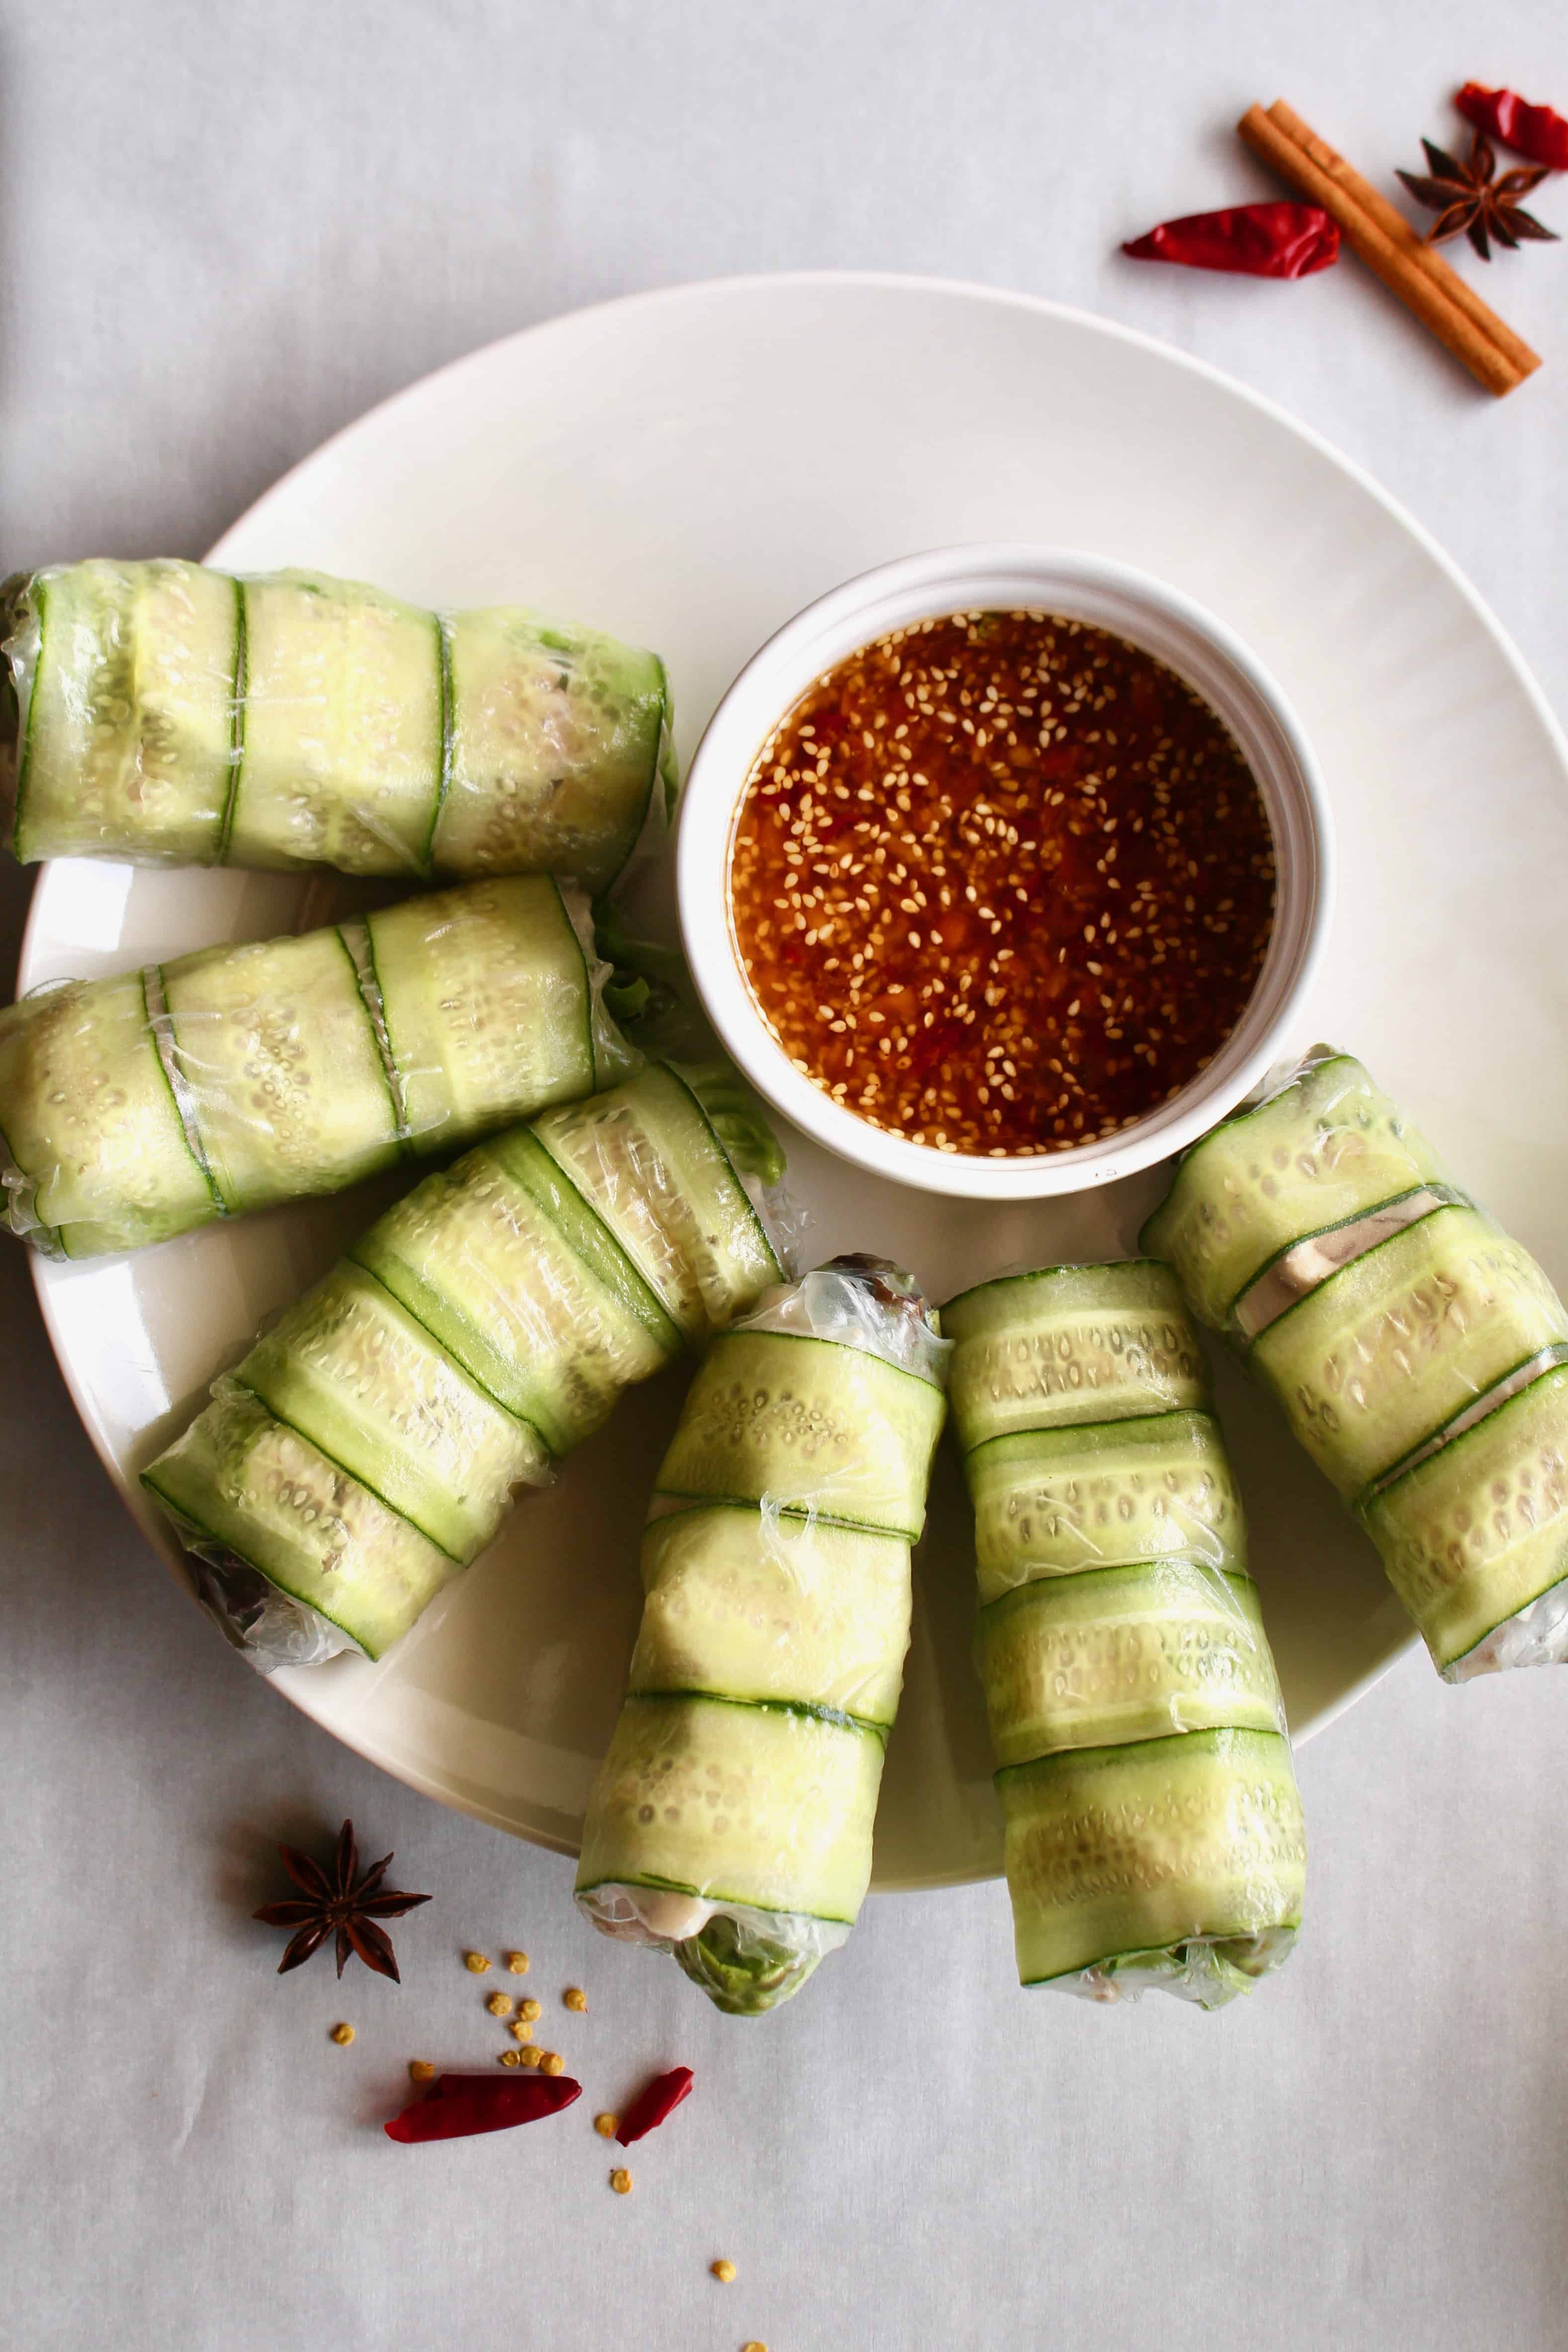 Need a fresh and light appetizer? These spicy chicken summer rolls are perfect! Moist and flavorful chicken is wrapped in rice paper with lettuce and cucumber, served with a spicy Sichuan dipping sauce! #summerrolls #springrolls #ricepaper #chicken #chickenthigh #chinese #sichuan #spicy #healthy #lettucewraps #appetizer #fresh #light #partyfood #asian